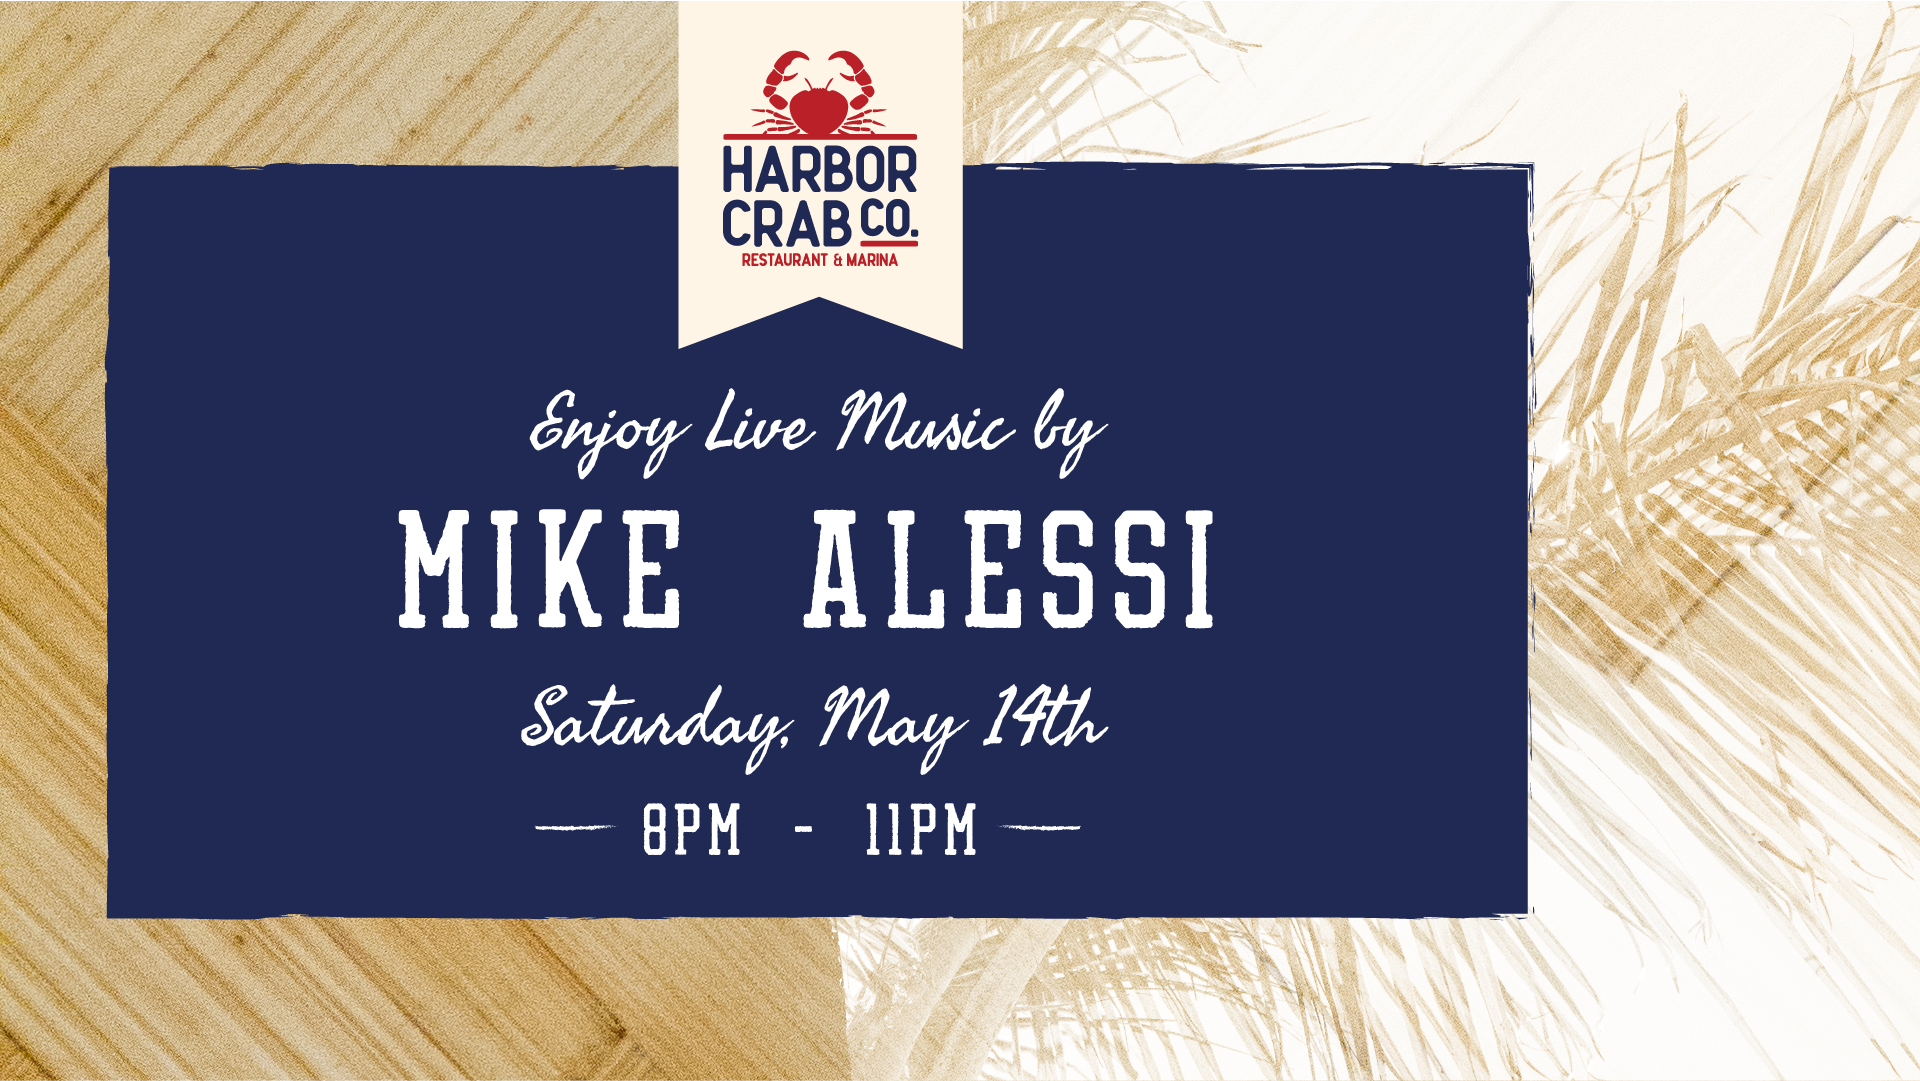 Flyer for Mike Alessi on Saturday, May 14th - 8pm